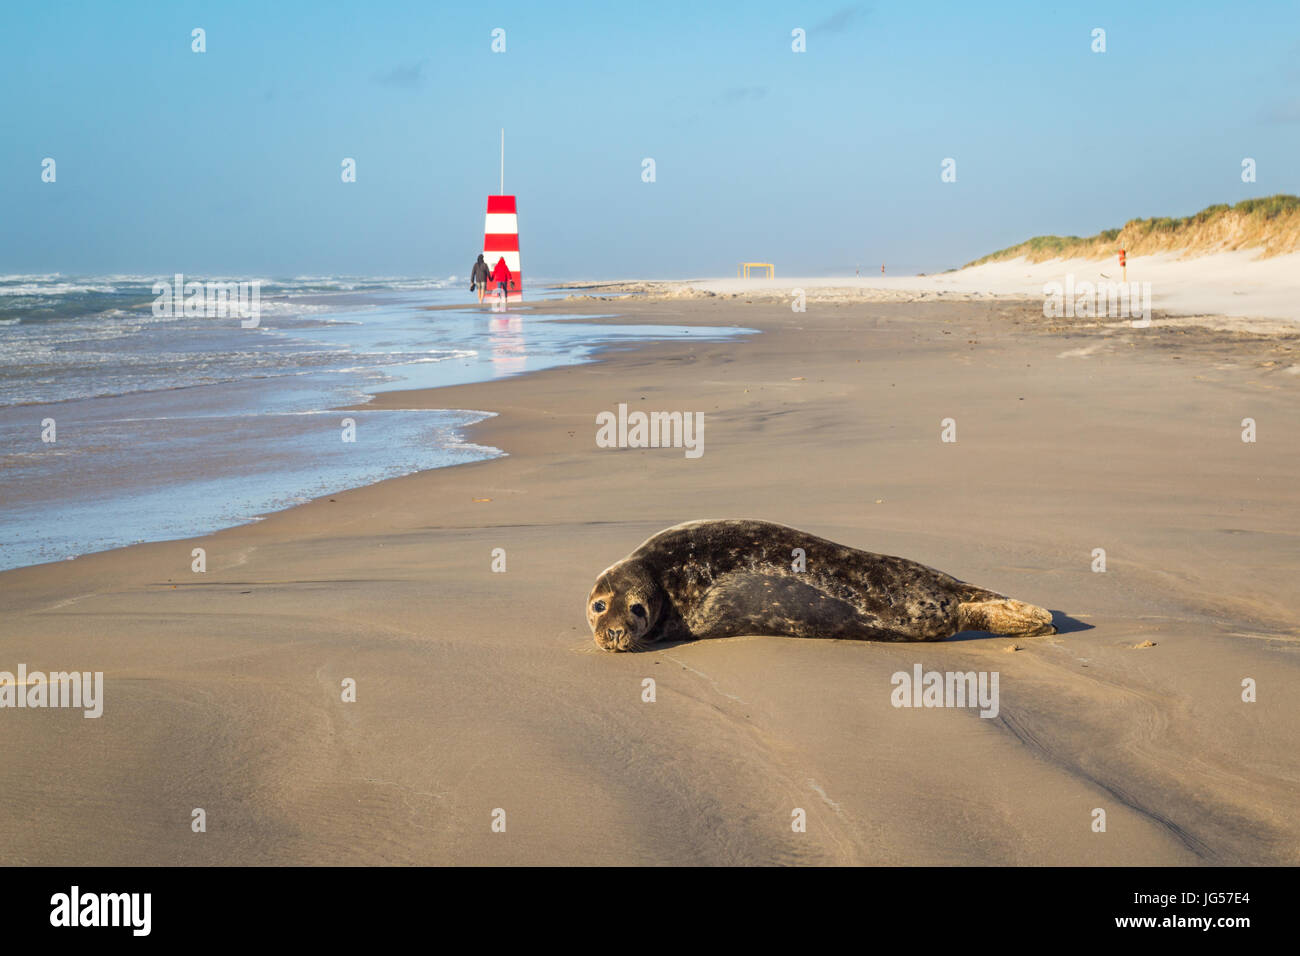 Harbor seal resting on beach, with people walking in the background Stock Photo